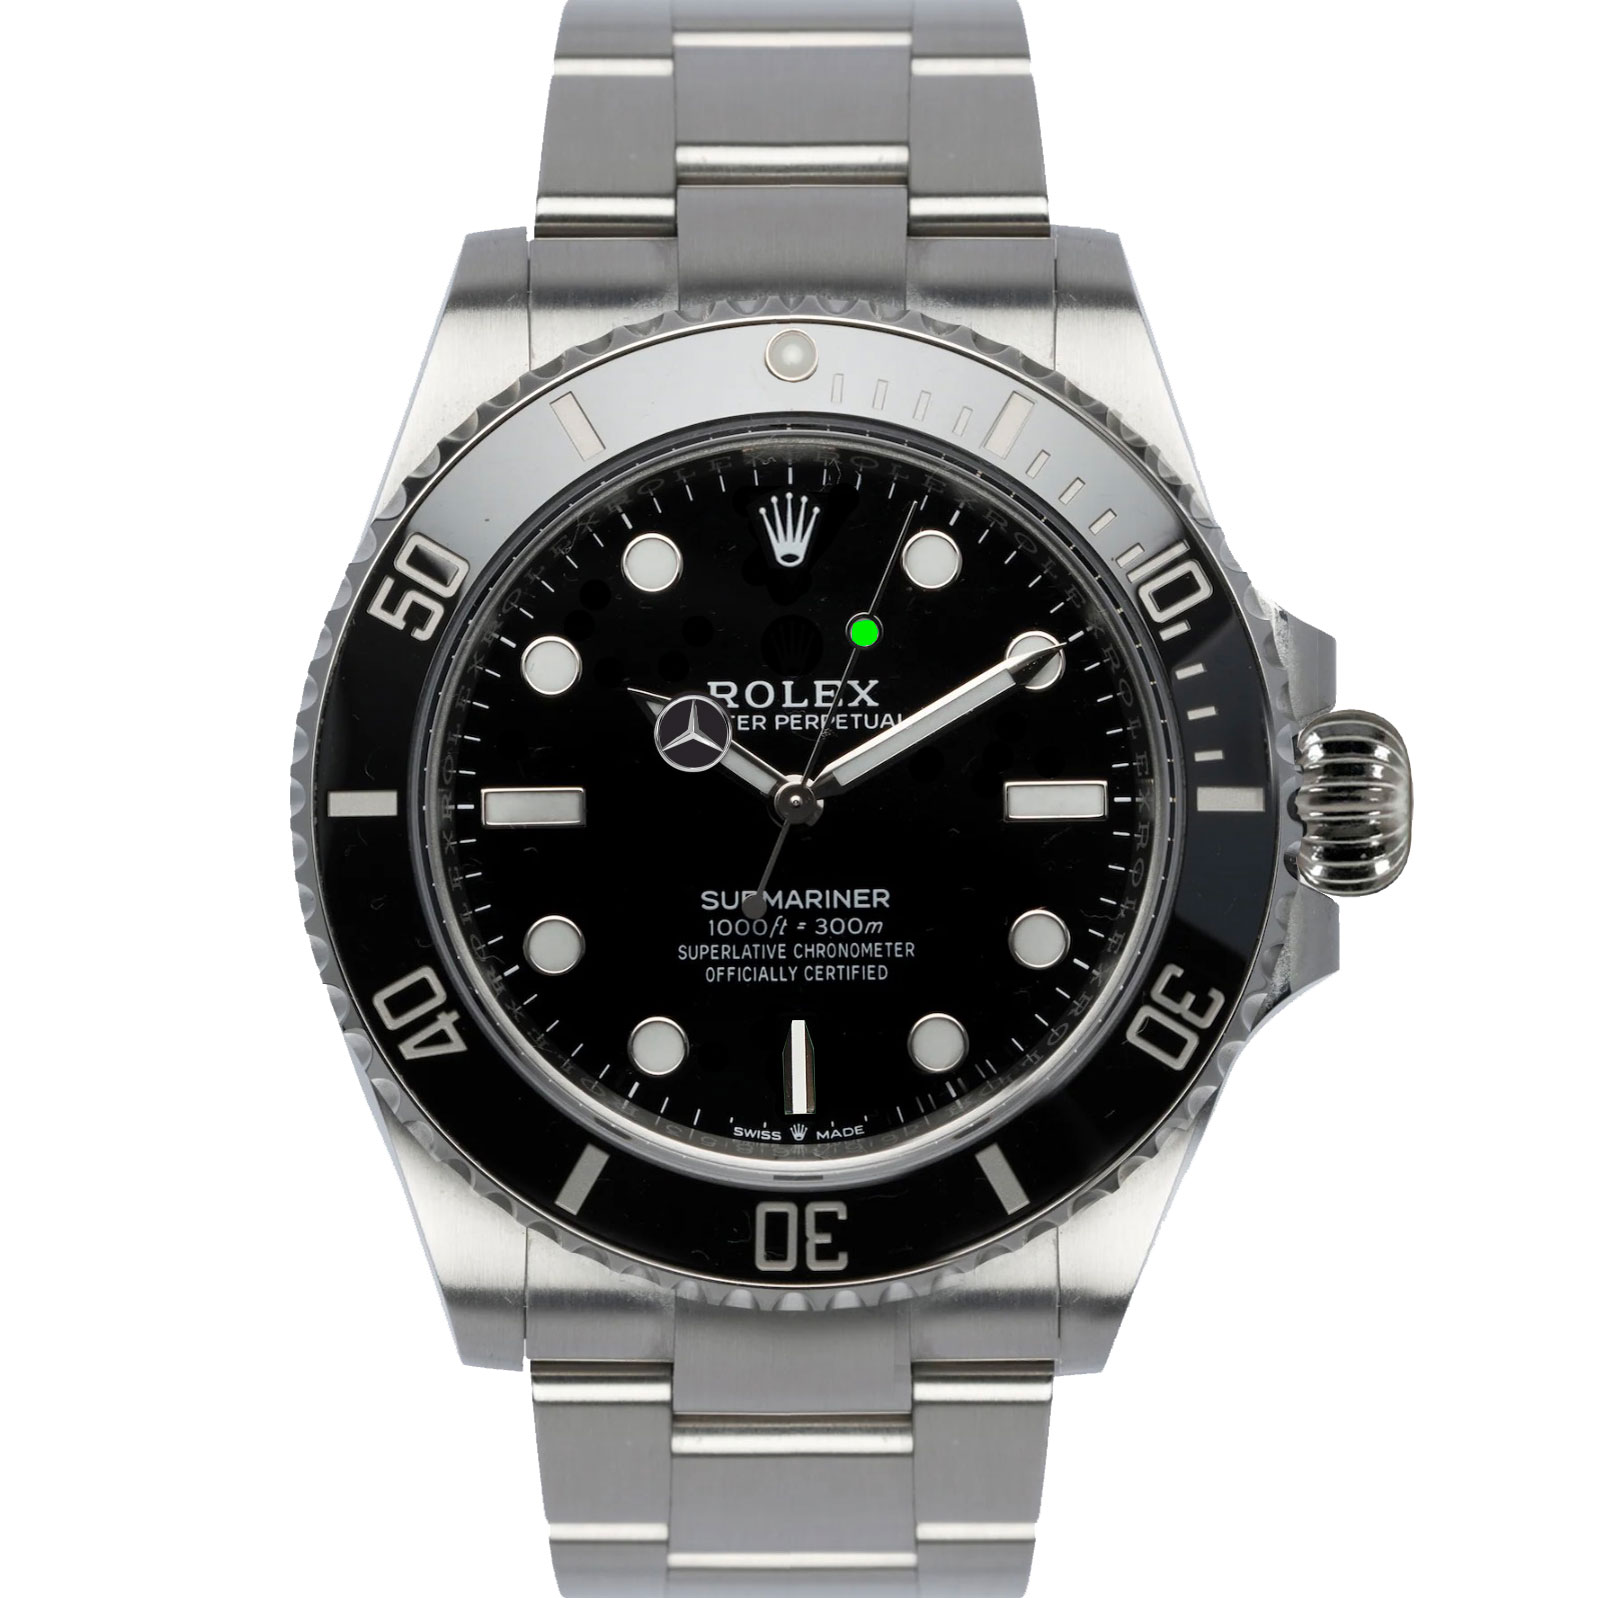 Rolex Submariner quiz: guess the wrong details!